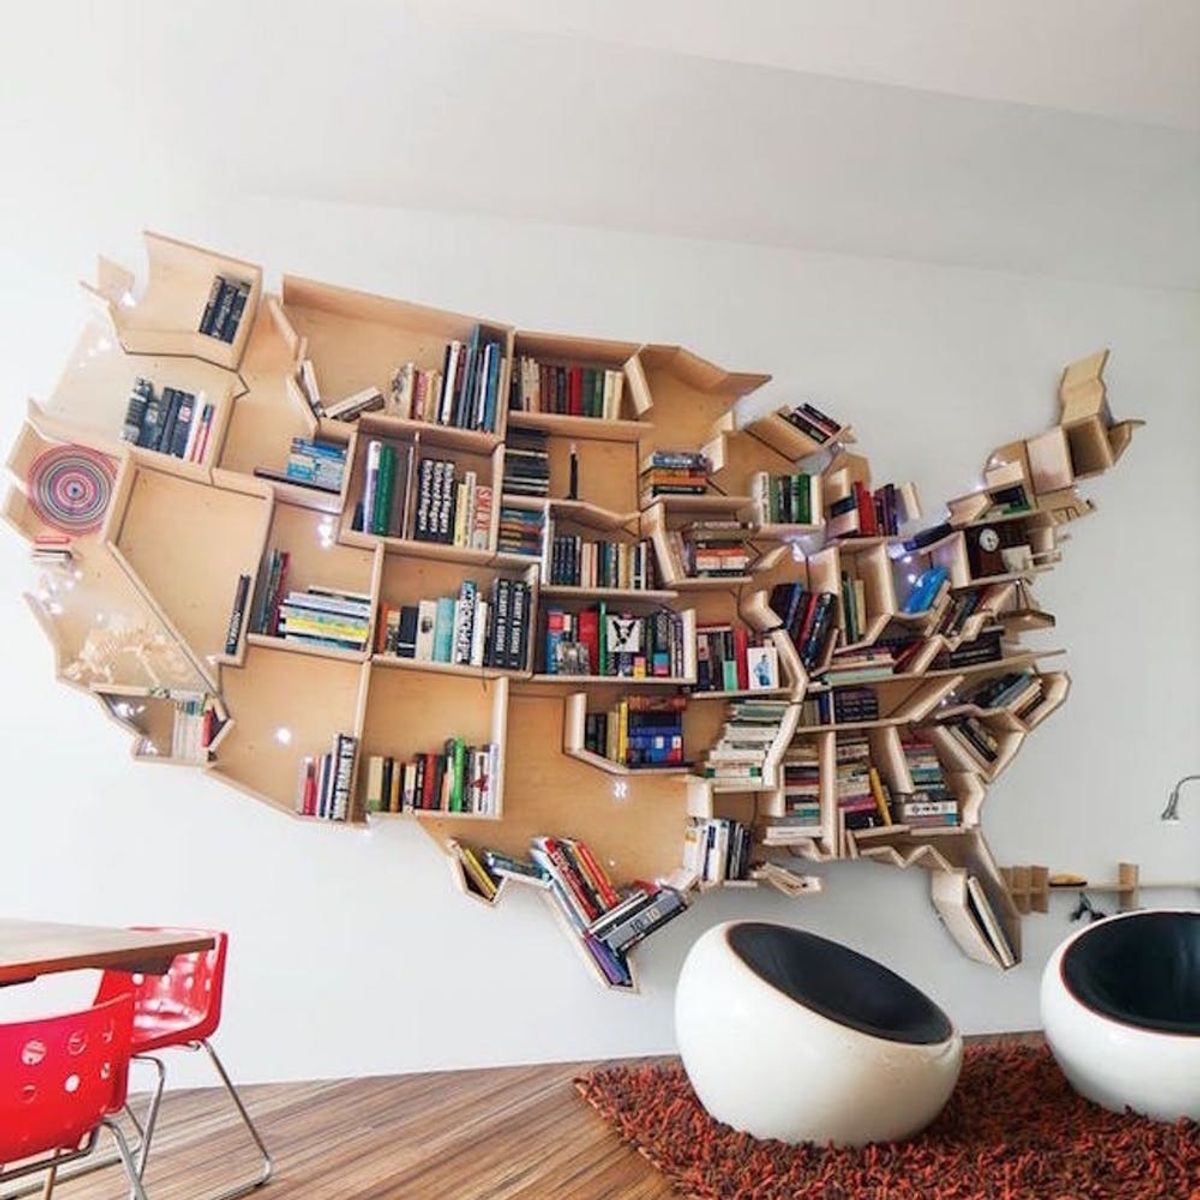 11 Creative Ways to Style Your Space With Books